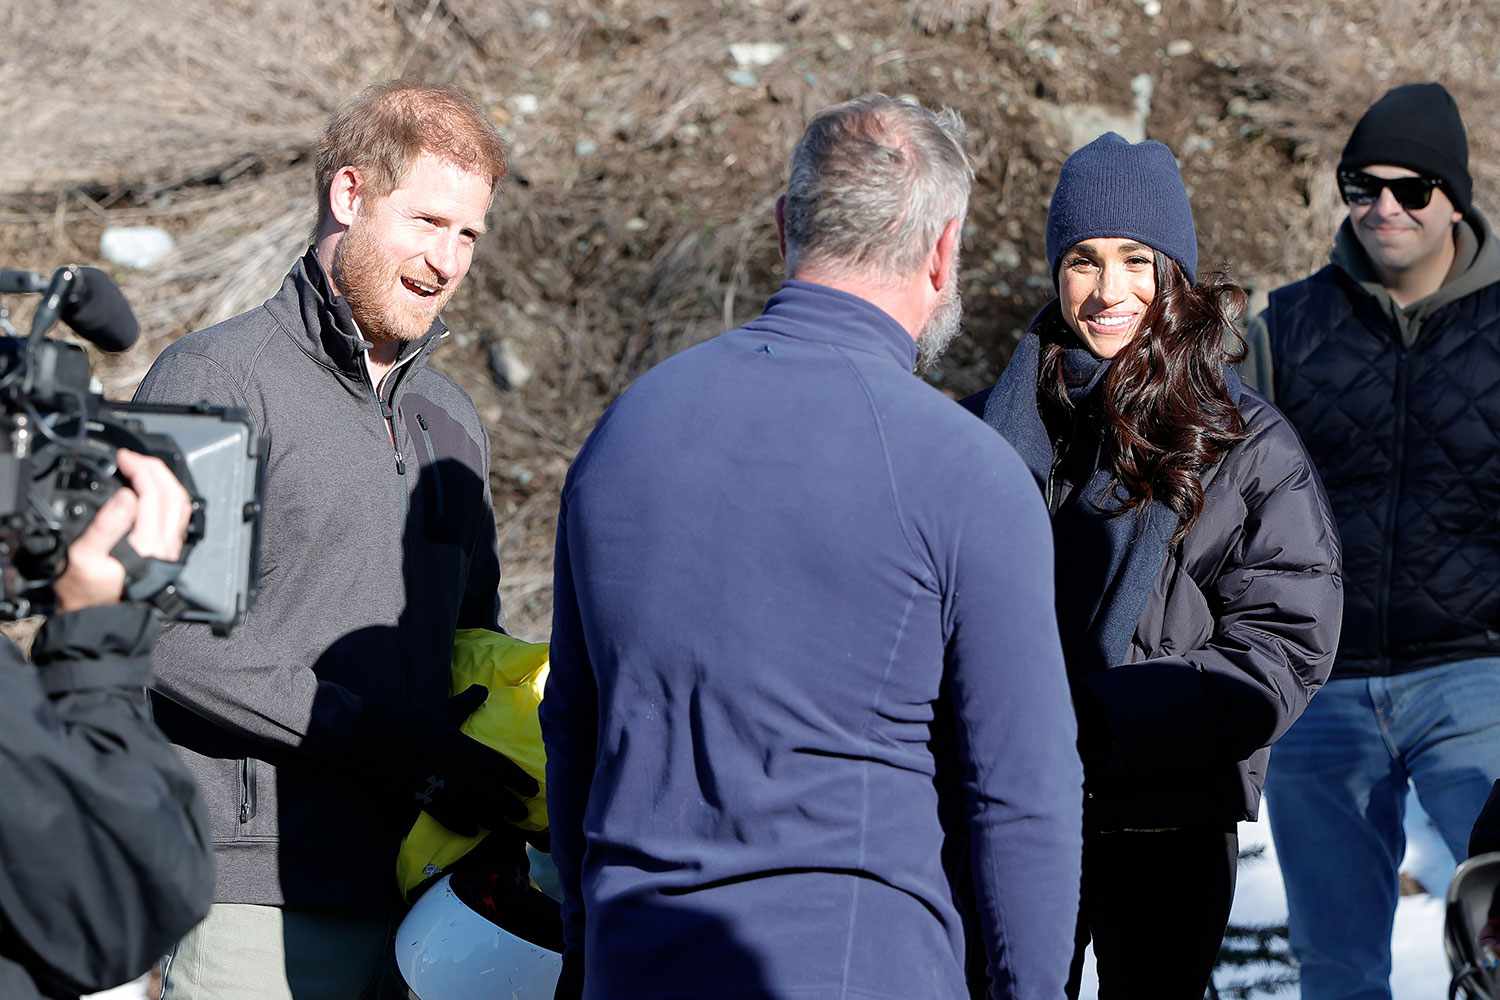 WHISTLER, BRITISH COLUMBIA - FEBRUARY 15: (L-R) Prince Harry, Duke of Sussex and Meghan, Duchess of Sussex attend Invictus Games Vancouver Whistlers 2025's One Year To Go Winter Training Camp on February 15, 2024 in Whistler, British Columbia.